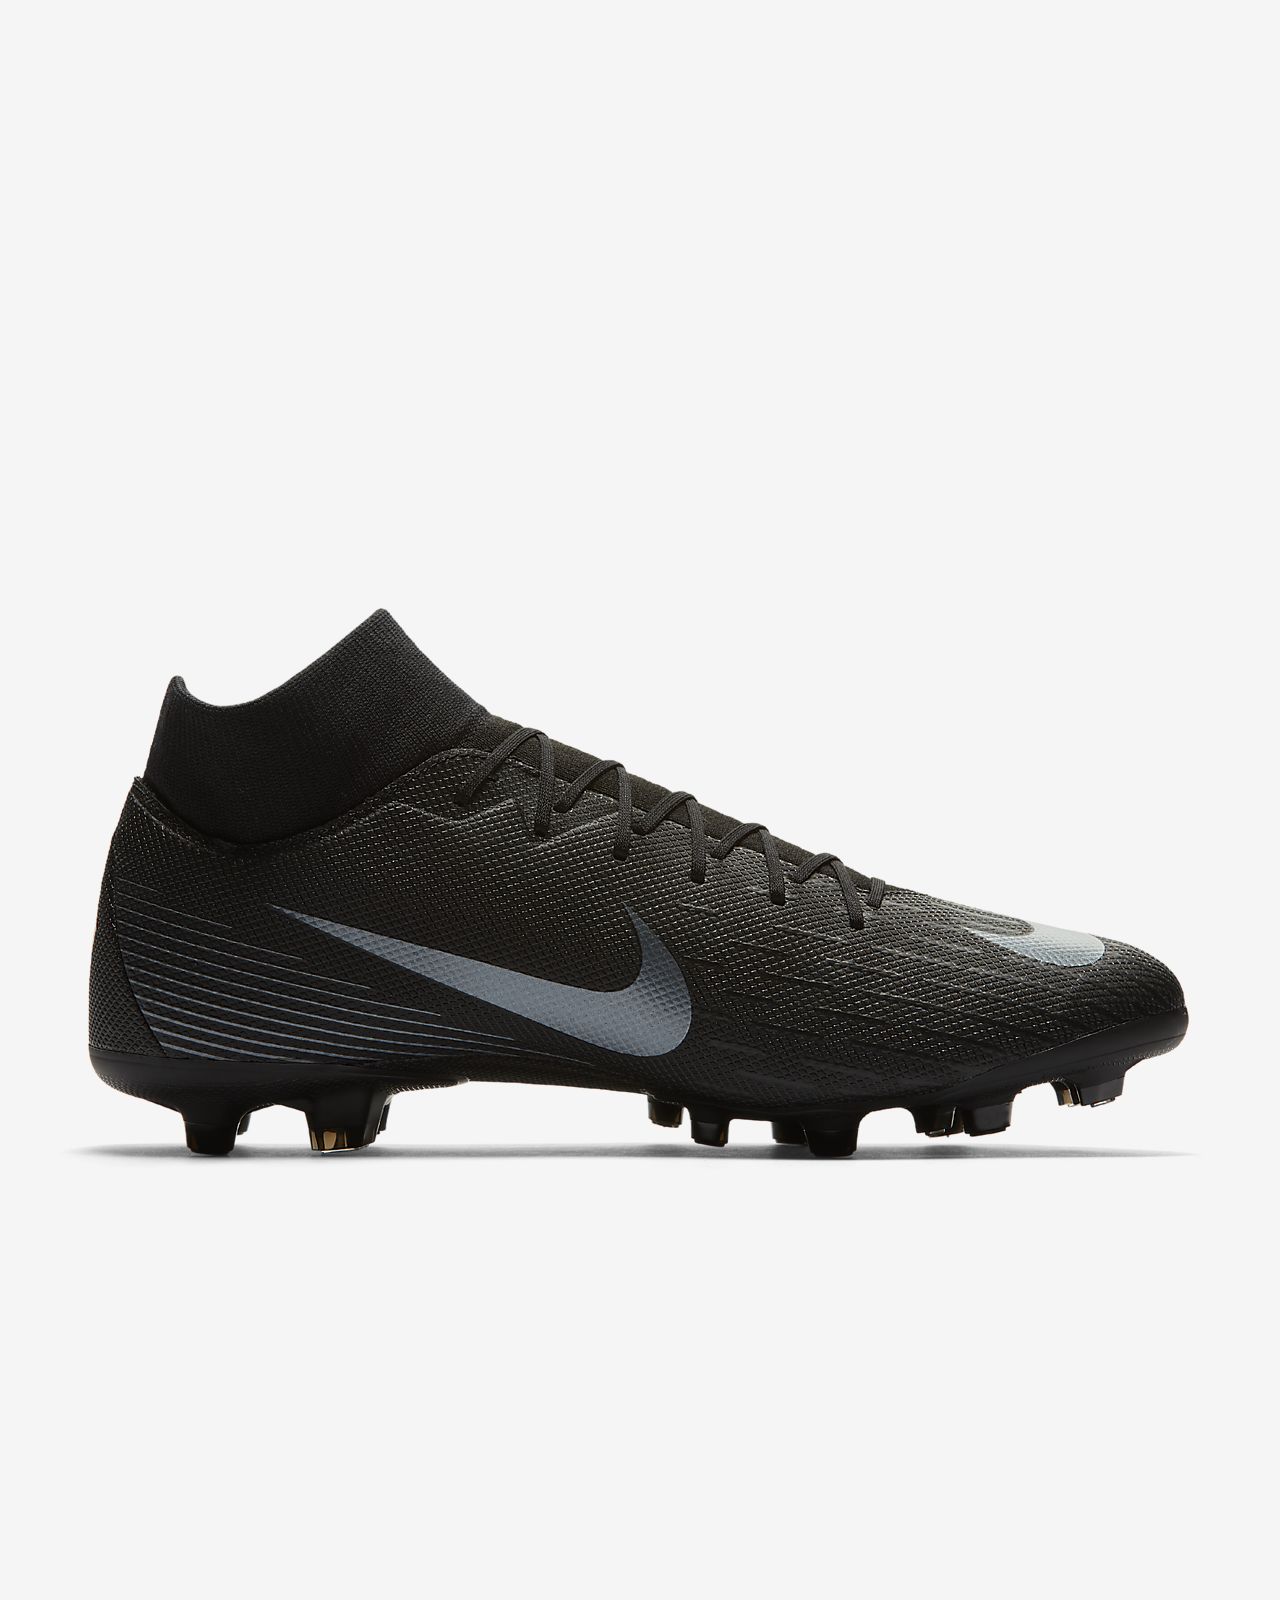 Buy Nike Men 's Superfly 6 Academy TF Soccer Shoes Volt.